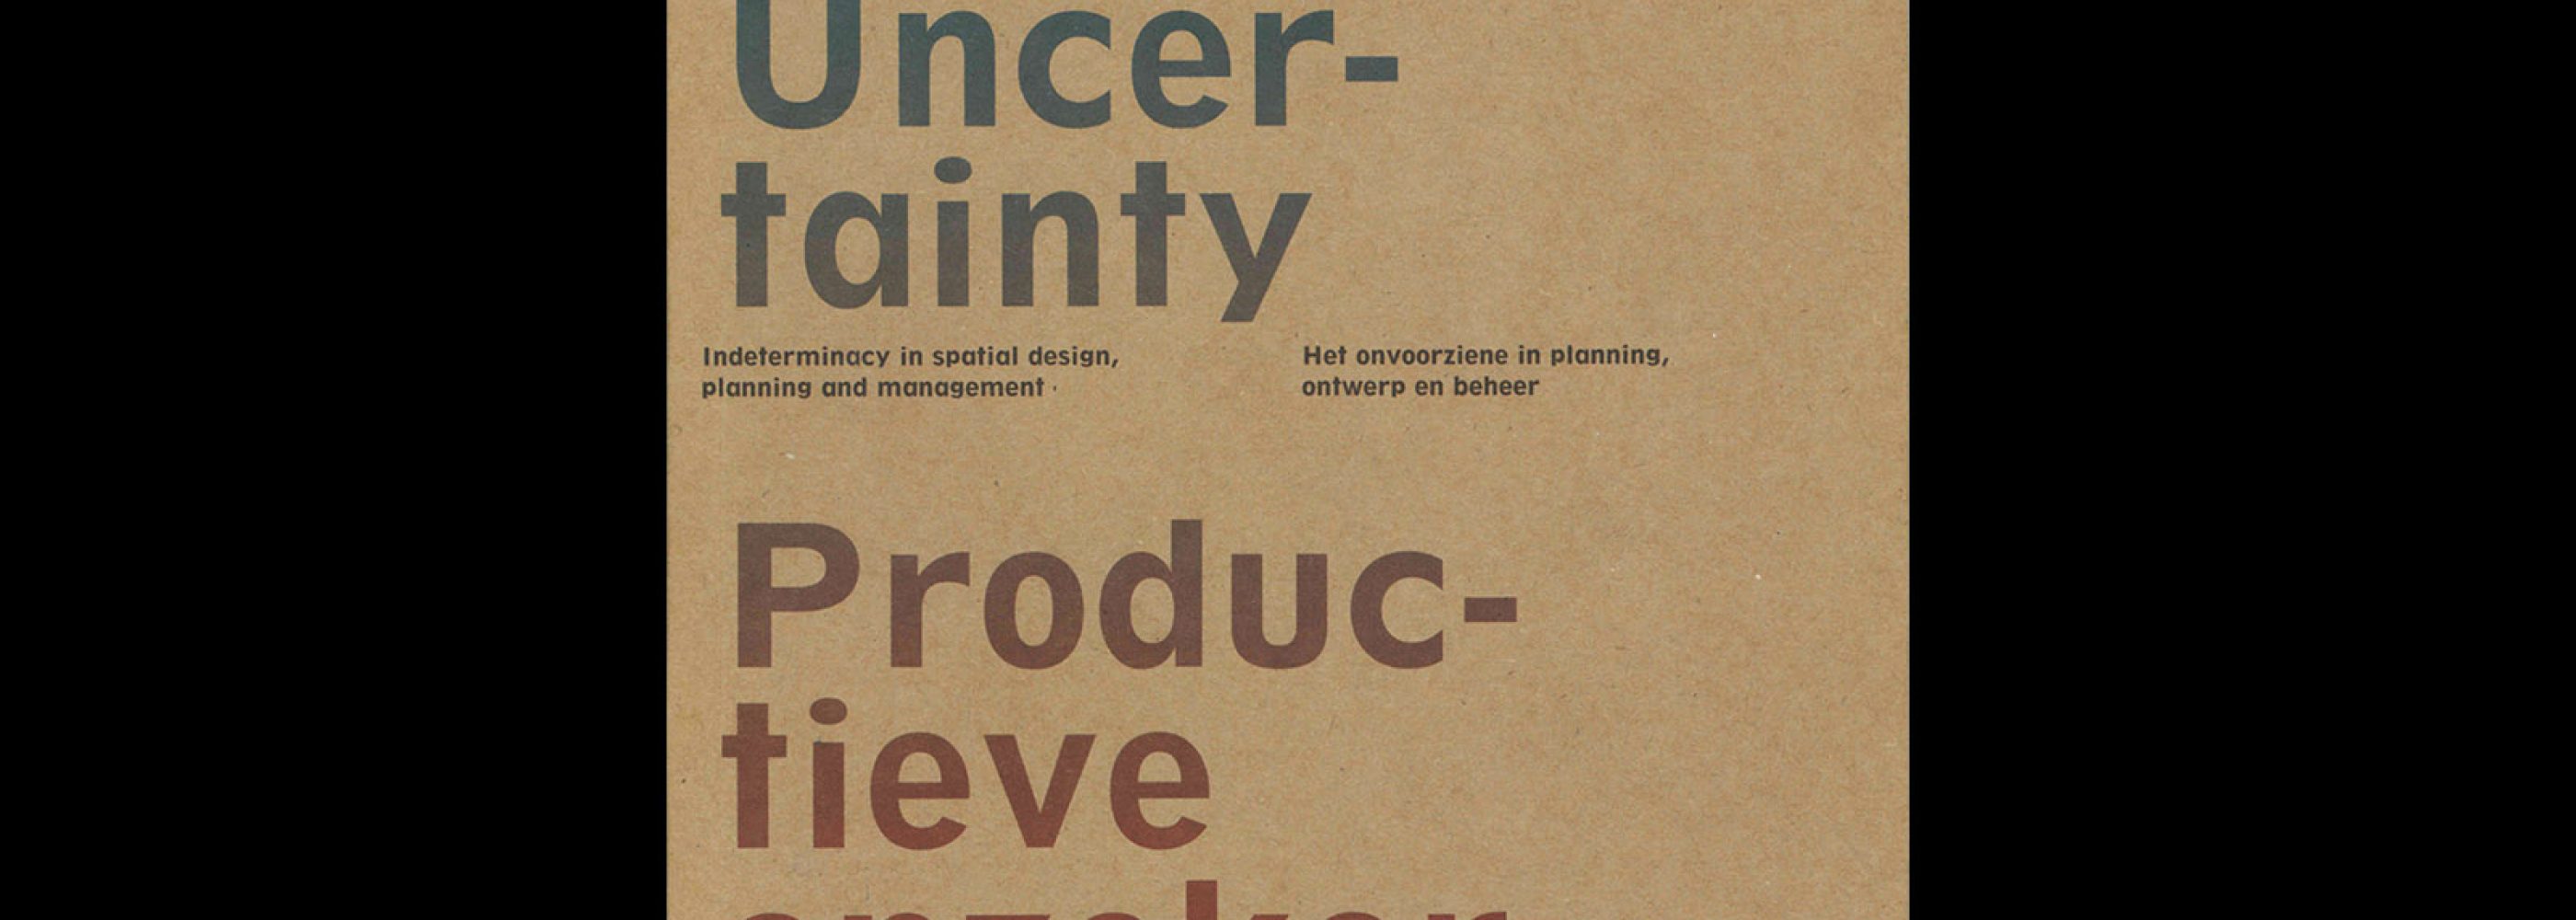 OASE 85, 2011, Productive Uncertainty. Designed by Aagje Martens and Karel Martens